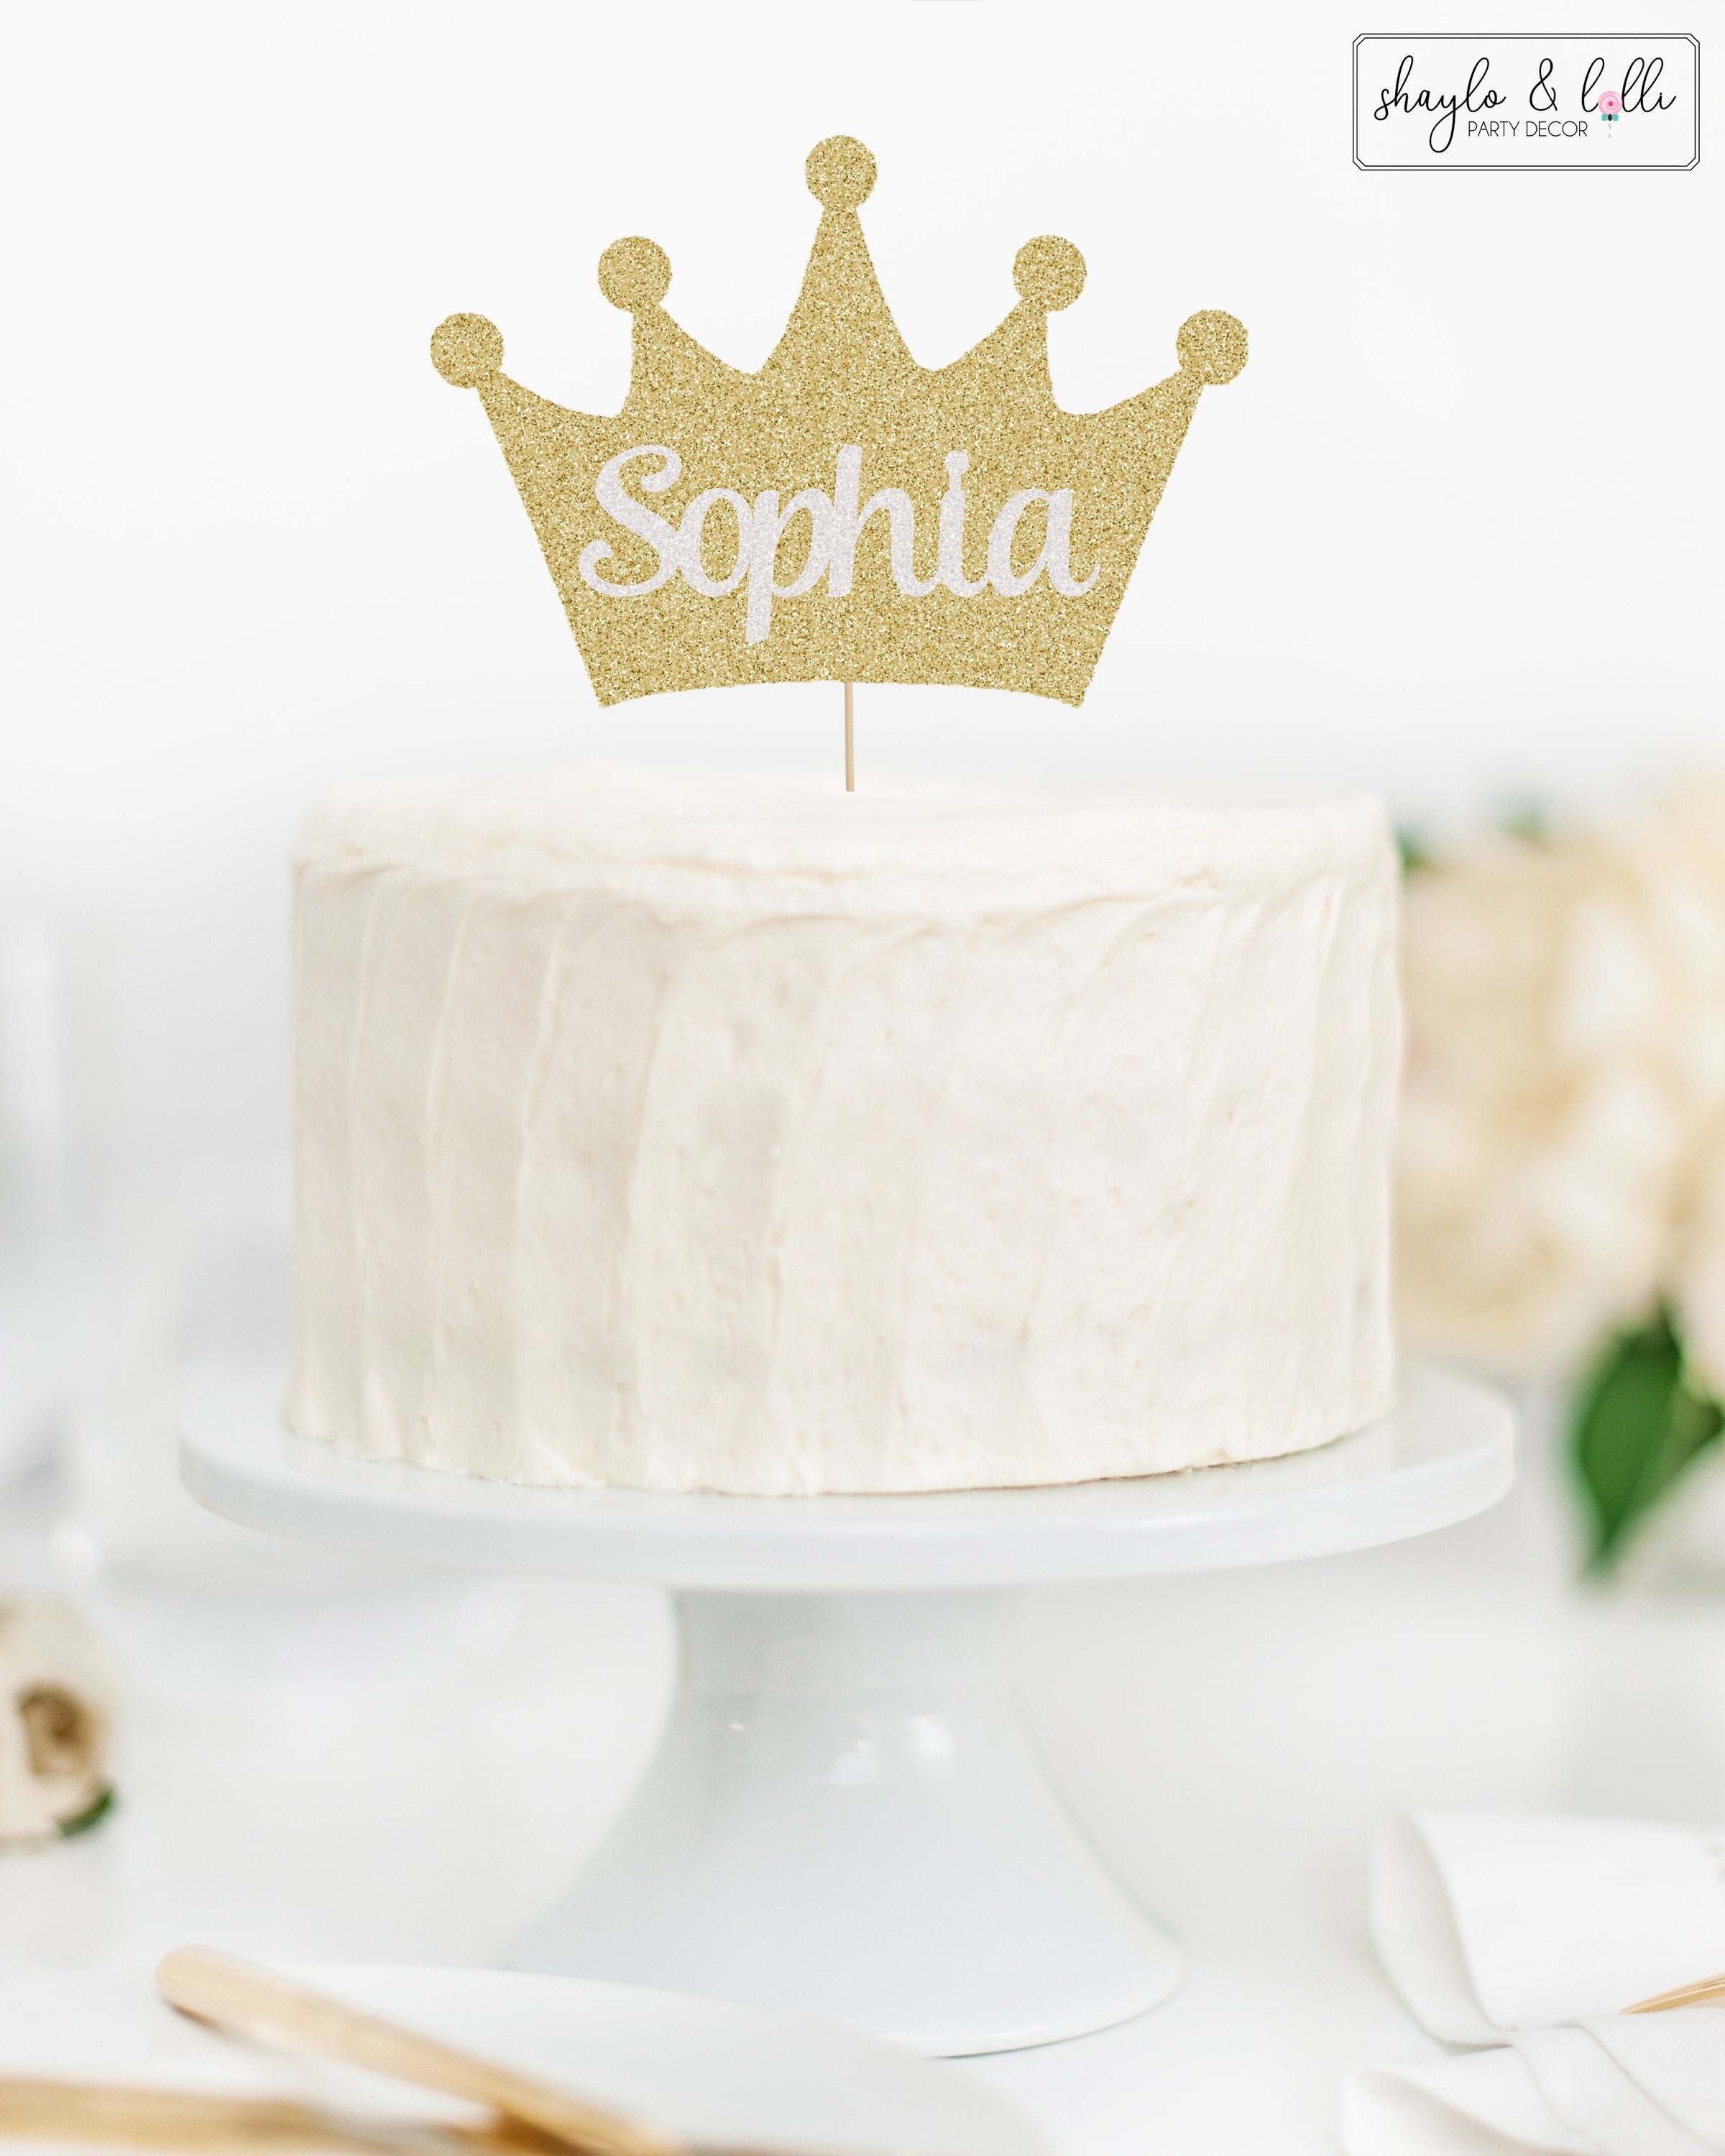 Crown Cake Topper, Gold Crown for Wedding Cake Topper. Mini Crown, Party  Decor, Dessert Table, Quinceañera Cake. Daisy. 